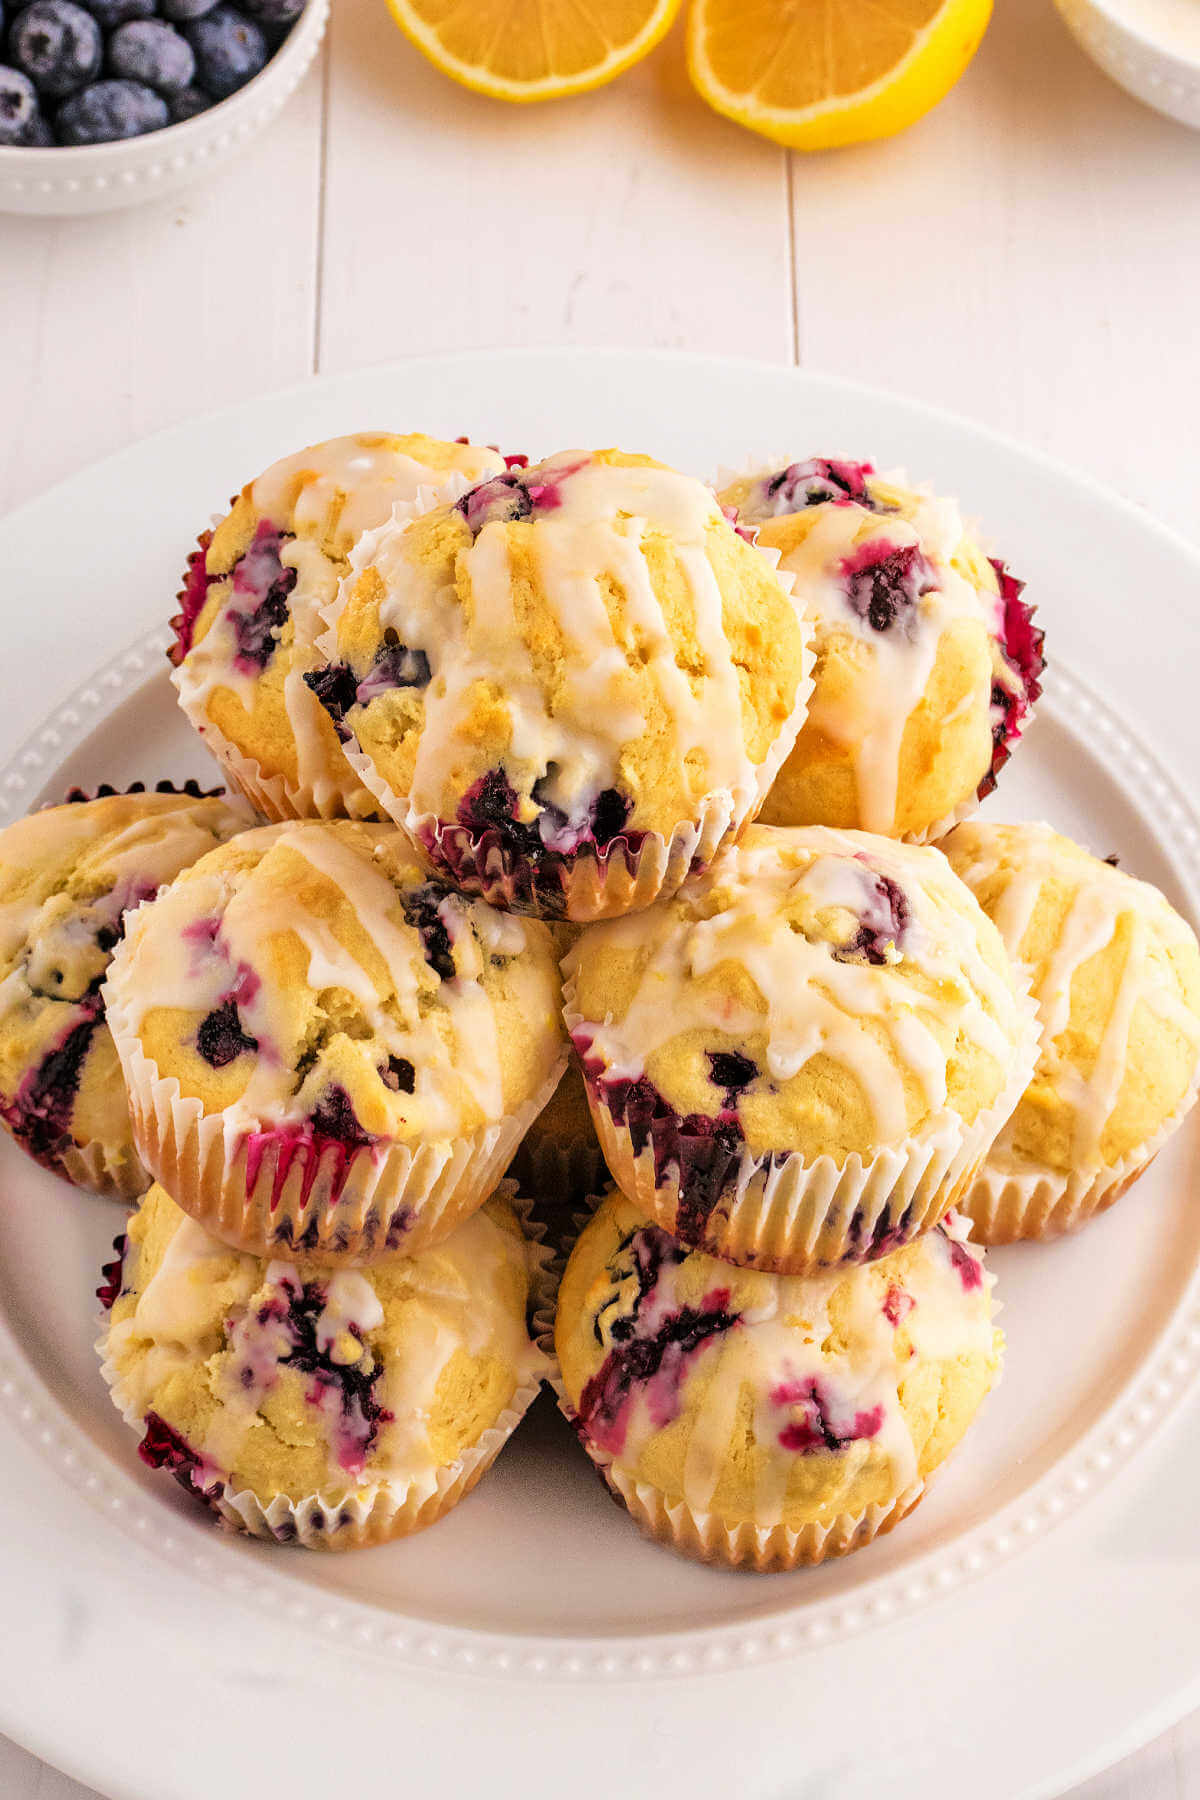 A plate of lemon blueberry muffins on a table.